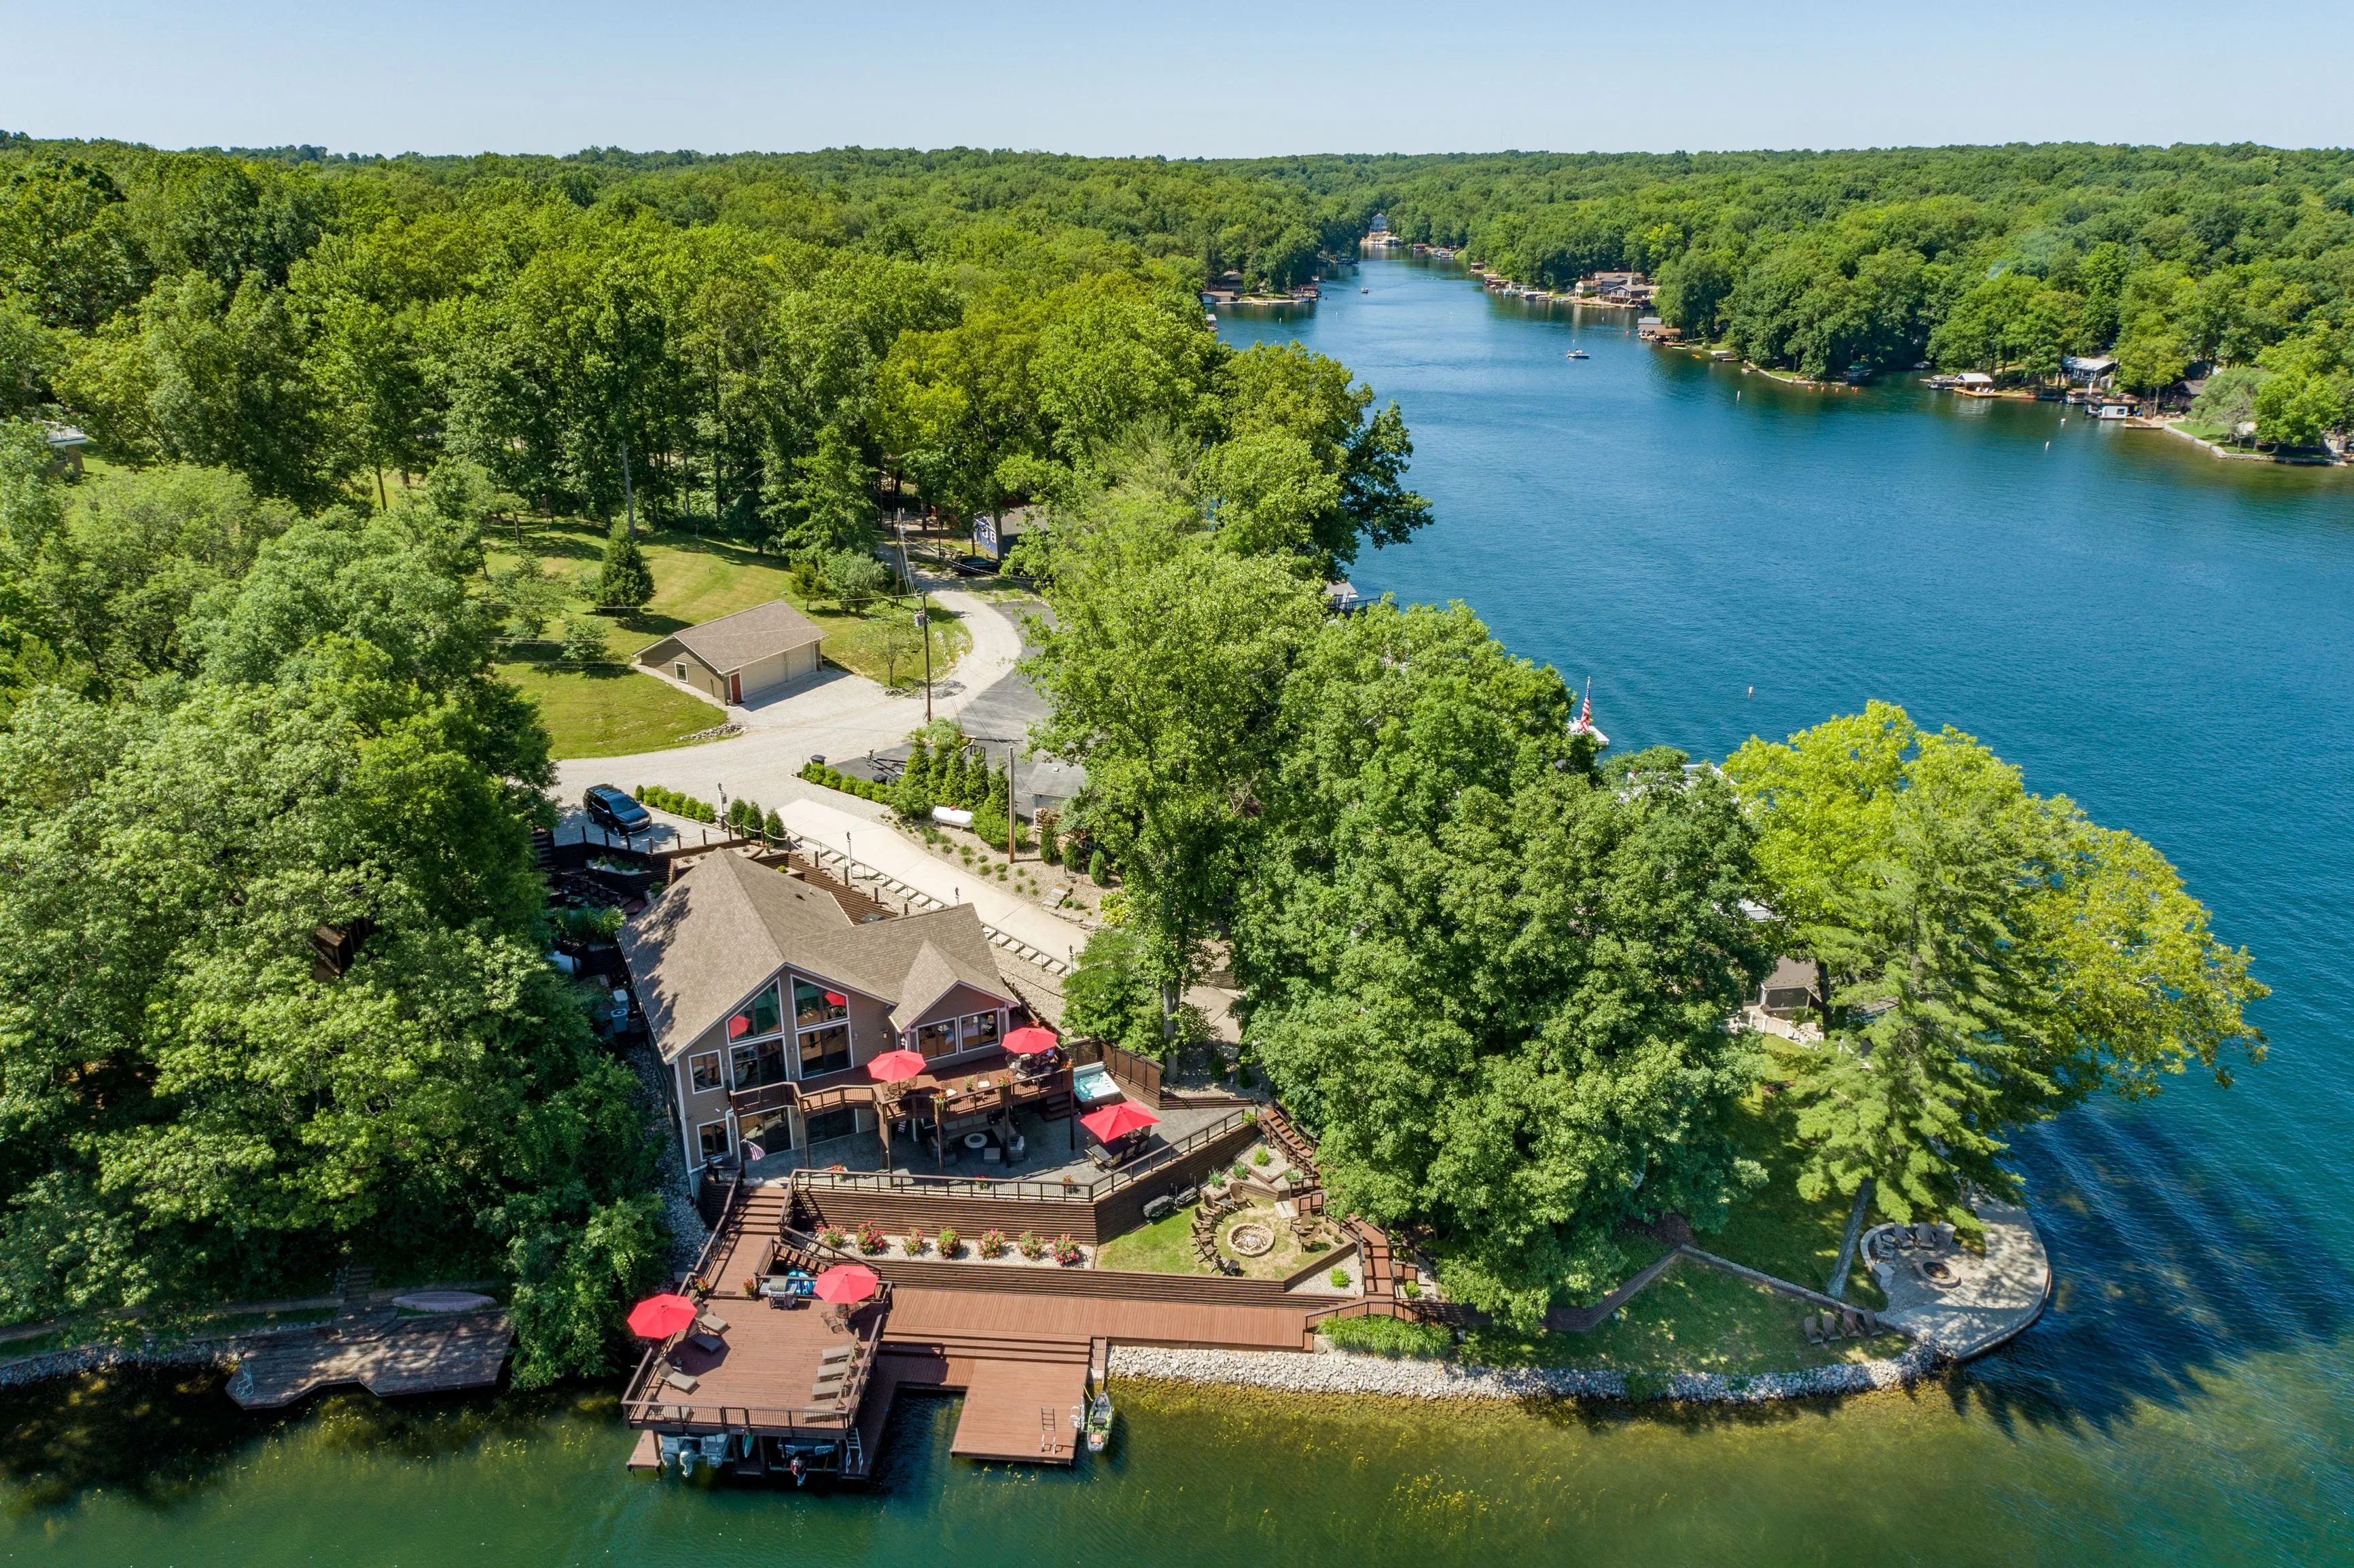 Aerial view of lakeside houses surrounded by lush greenery with a clear blue sky above.